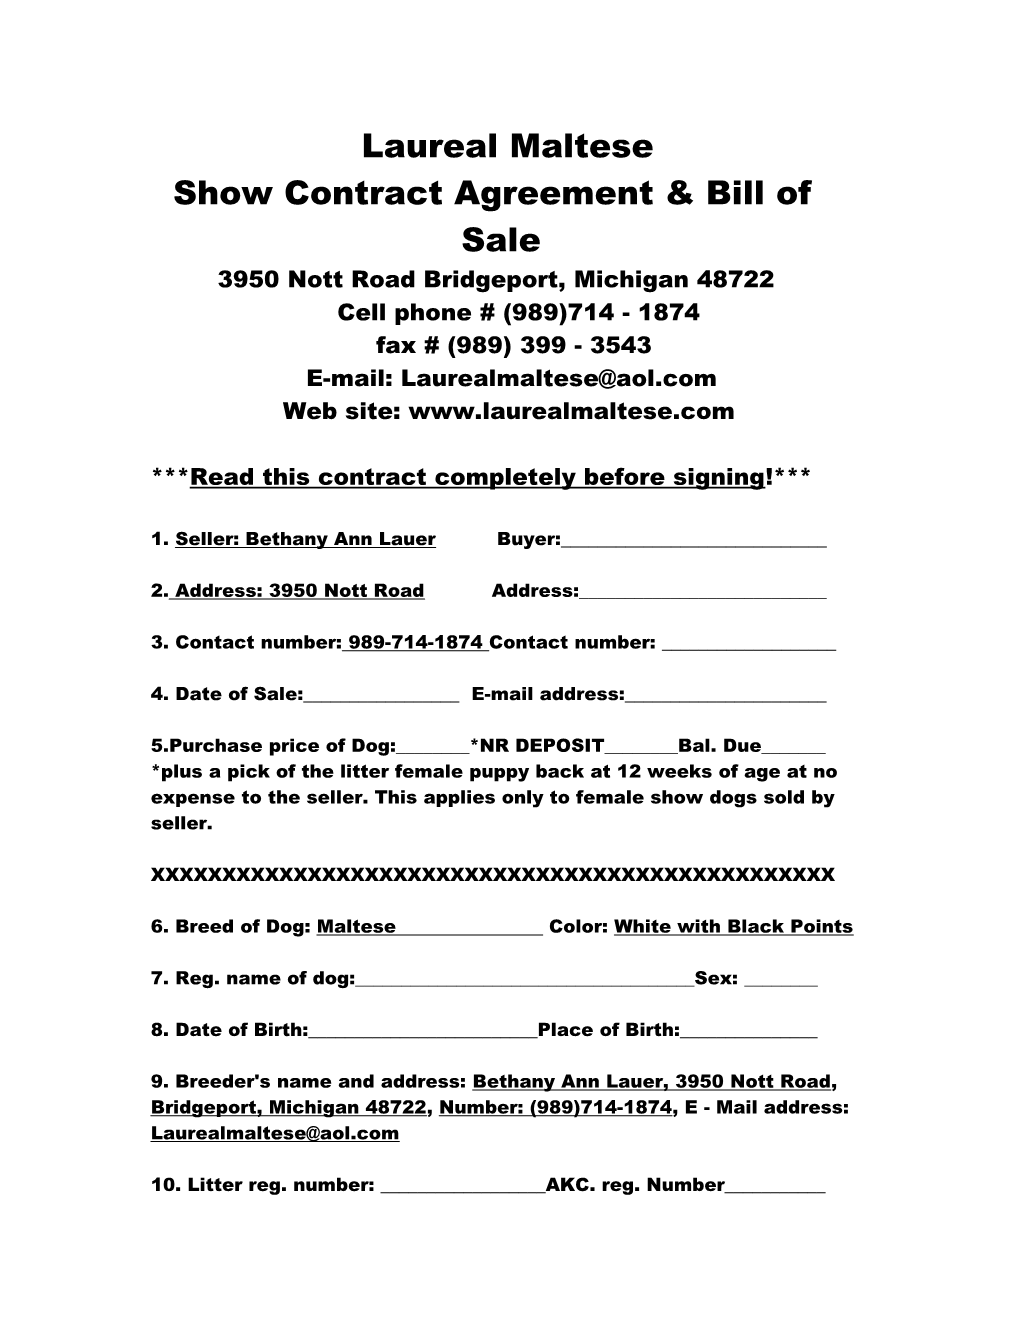 Show Contract Agreement & Bill Of